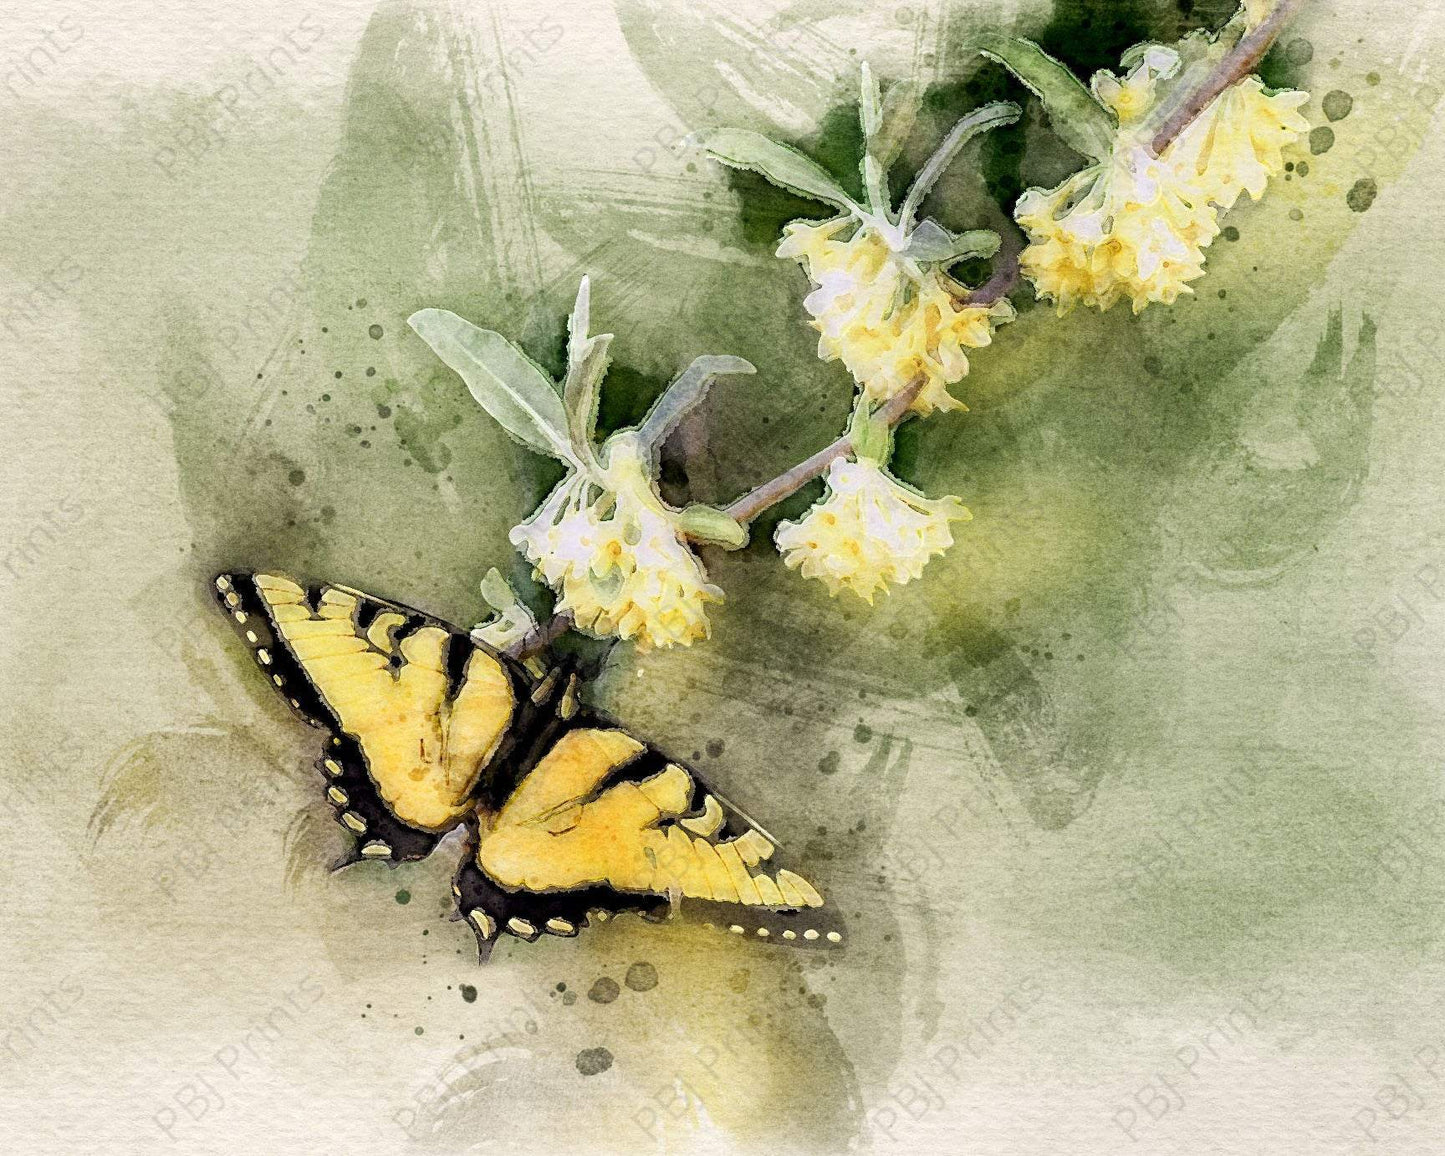 Tiger Swallowtail Watercolor - Artist by Justin Rice - New Arrivals